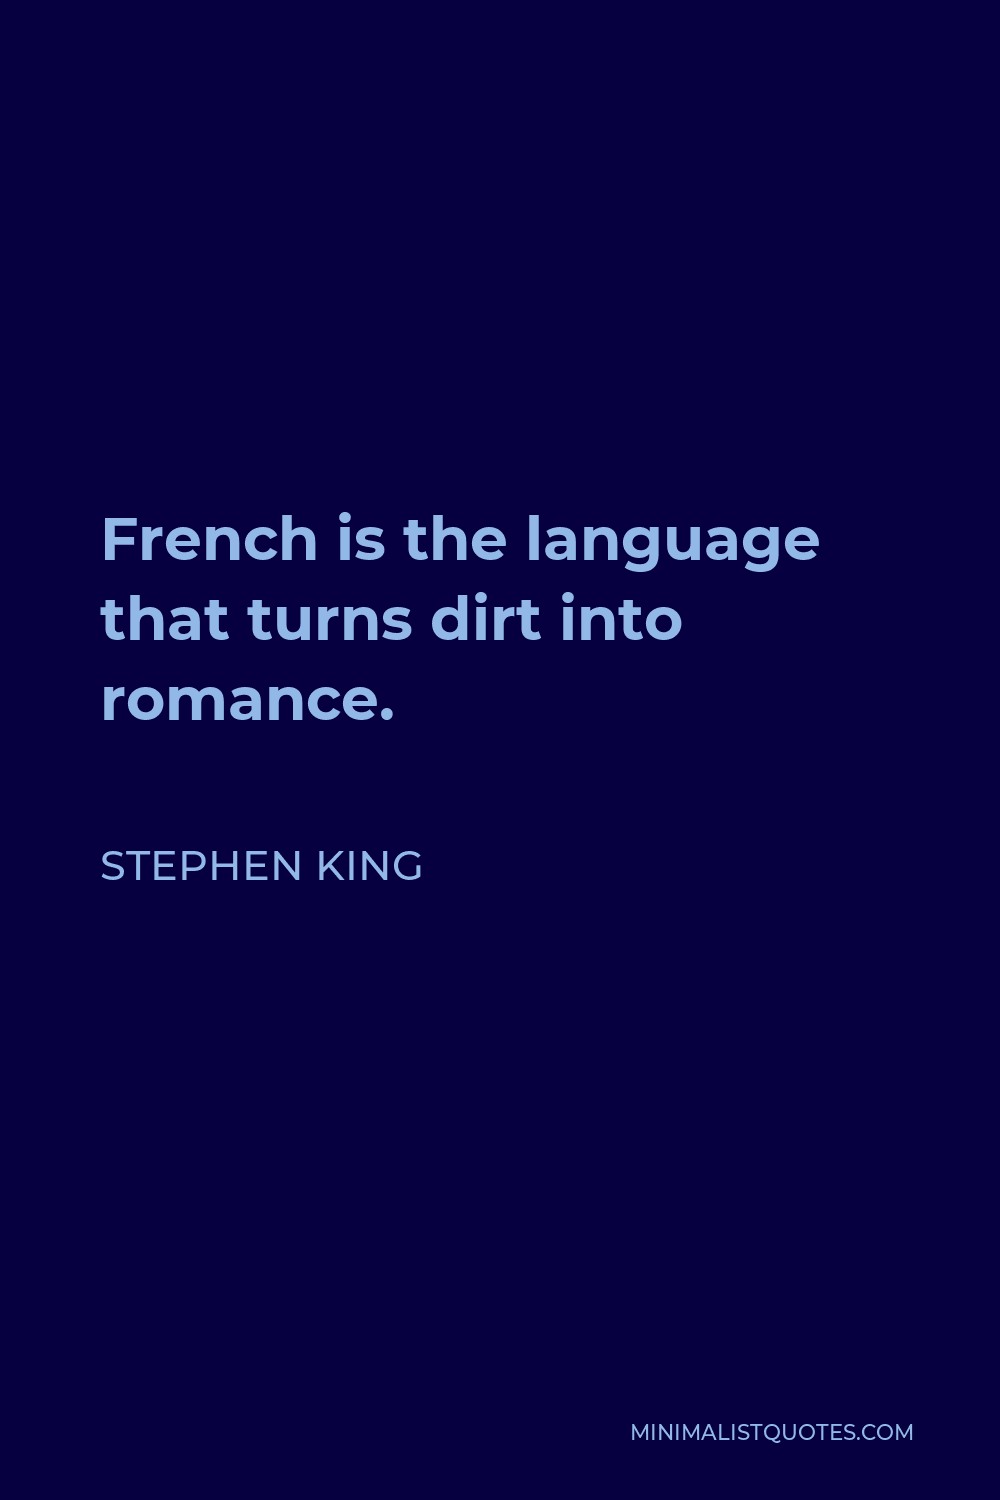 Stephen King Quote - French is the language that turns dirt into romance.